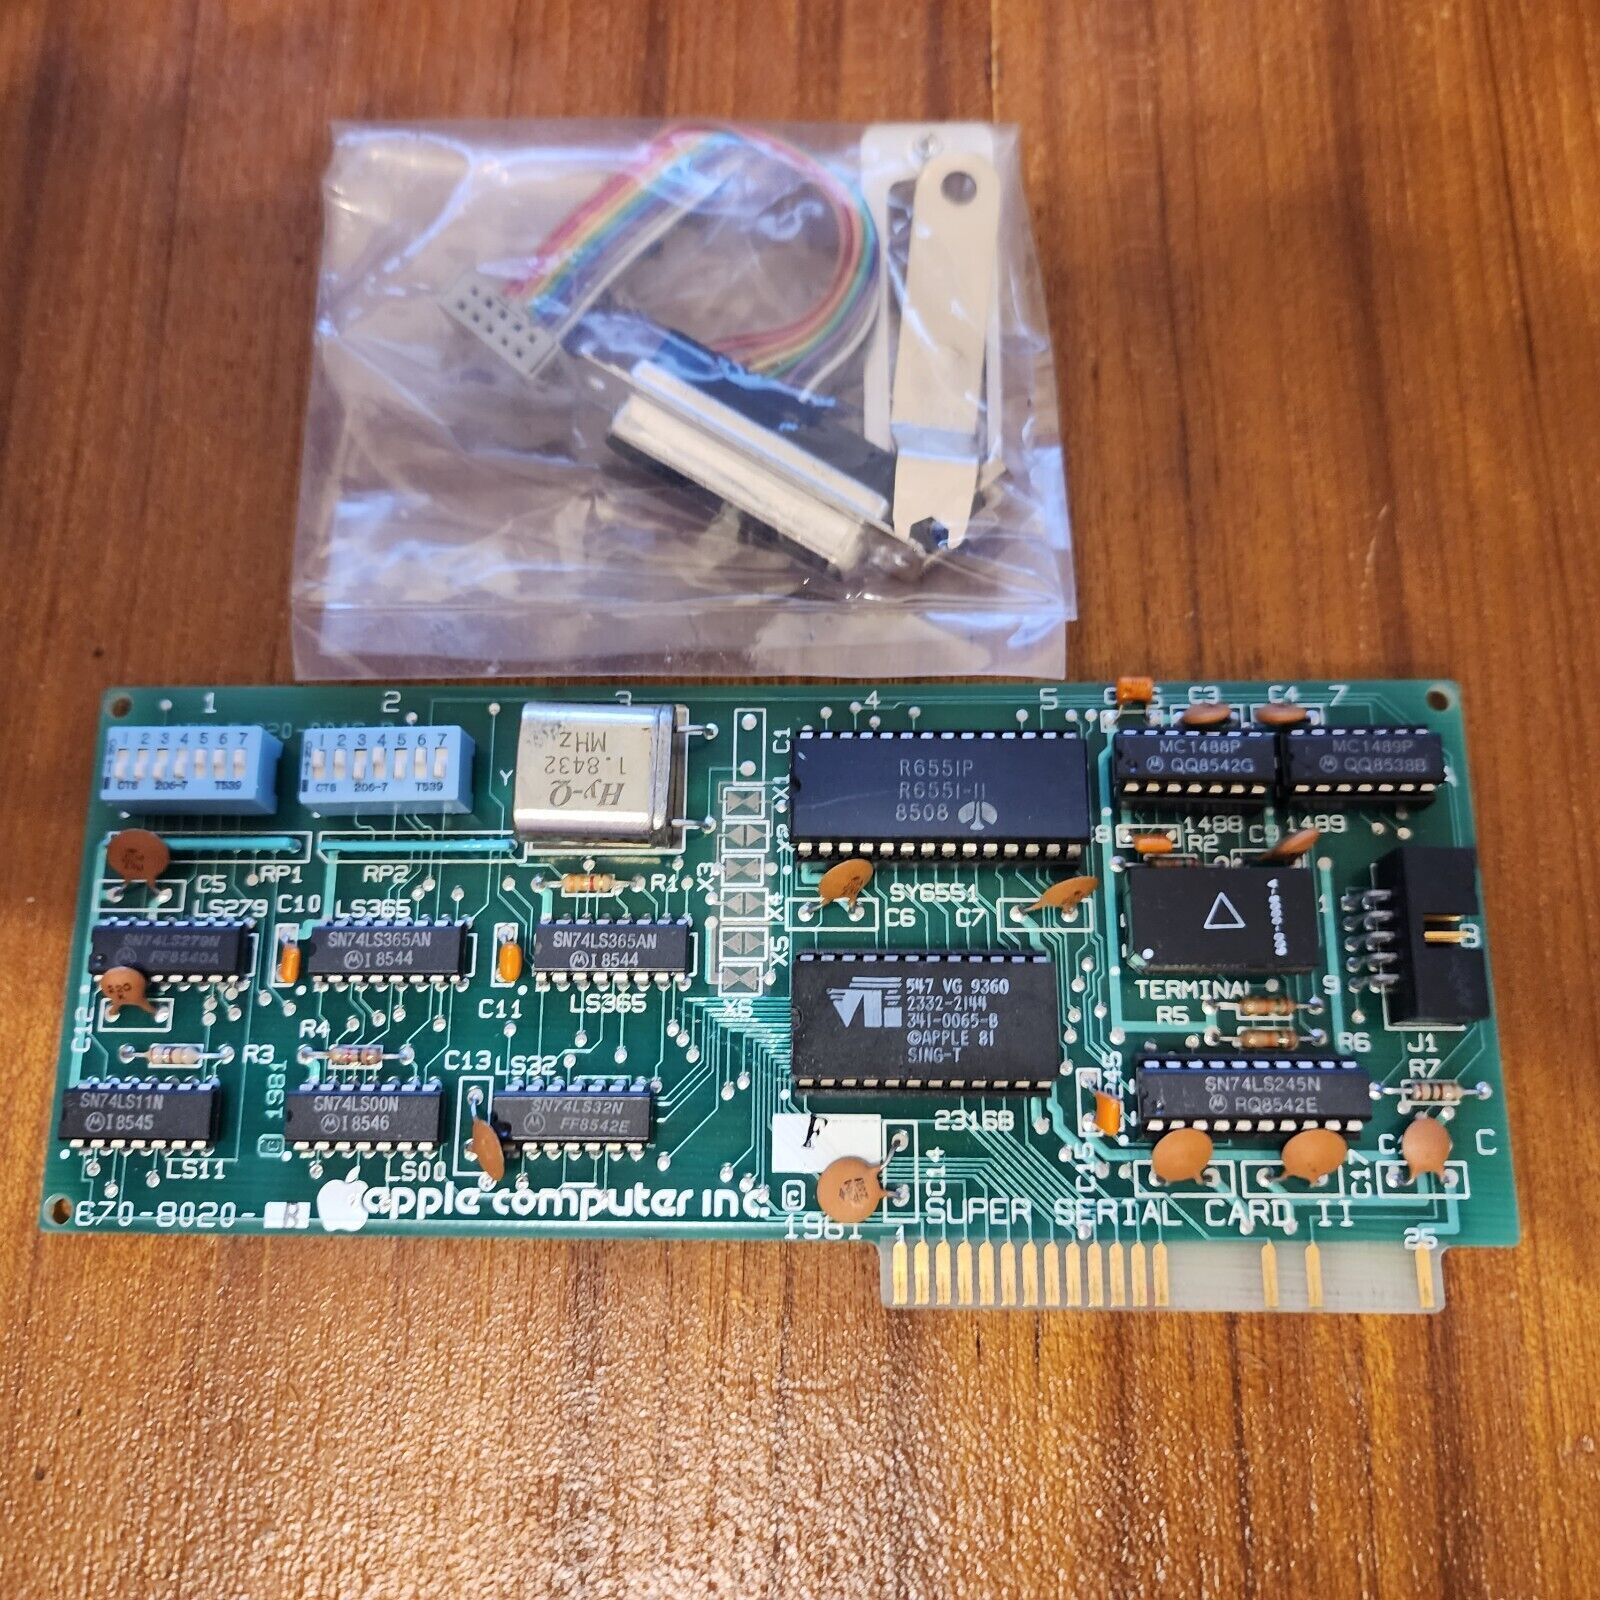 Apple II Super Serial Card II 670-8020 with DB25 Female connector